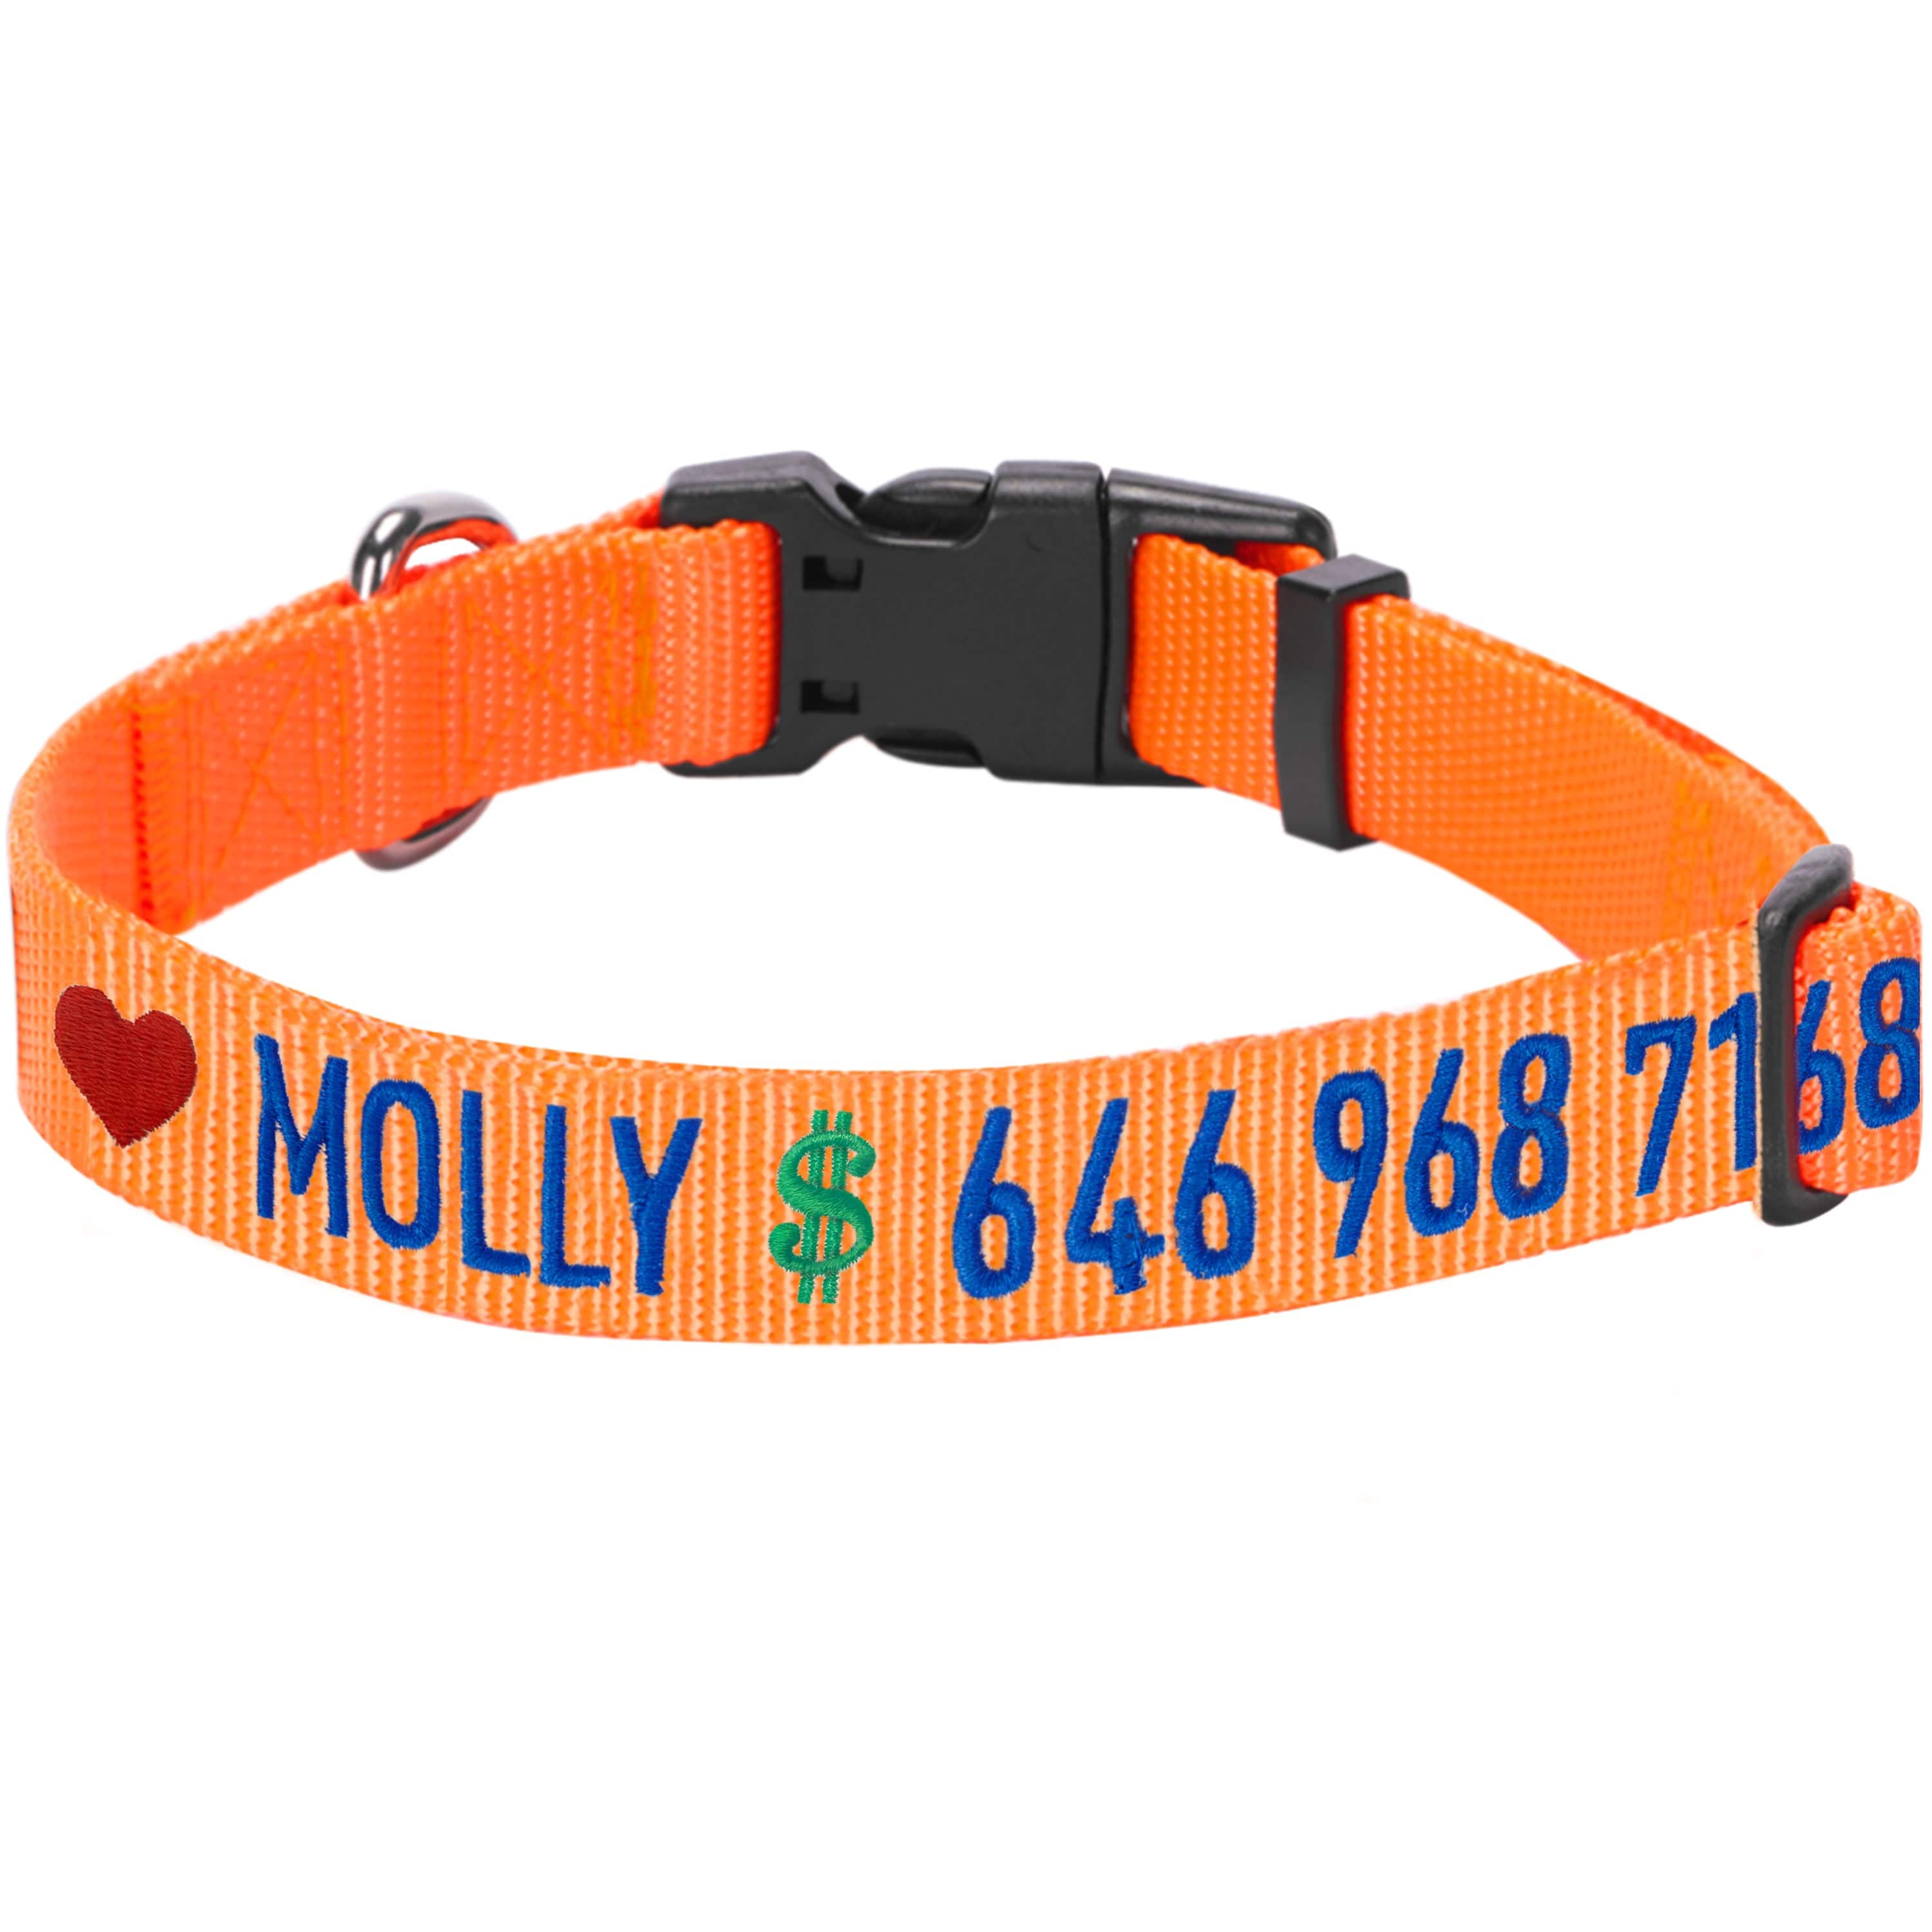 Customized Leather Dog ID Collar Personalized Pet Name Number and Leash set  XS-L